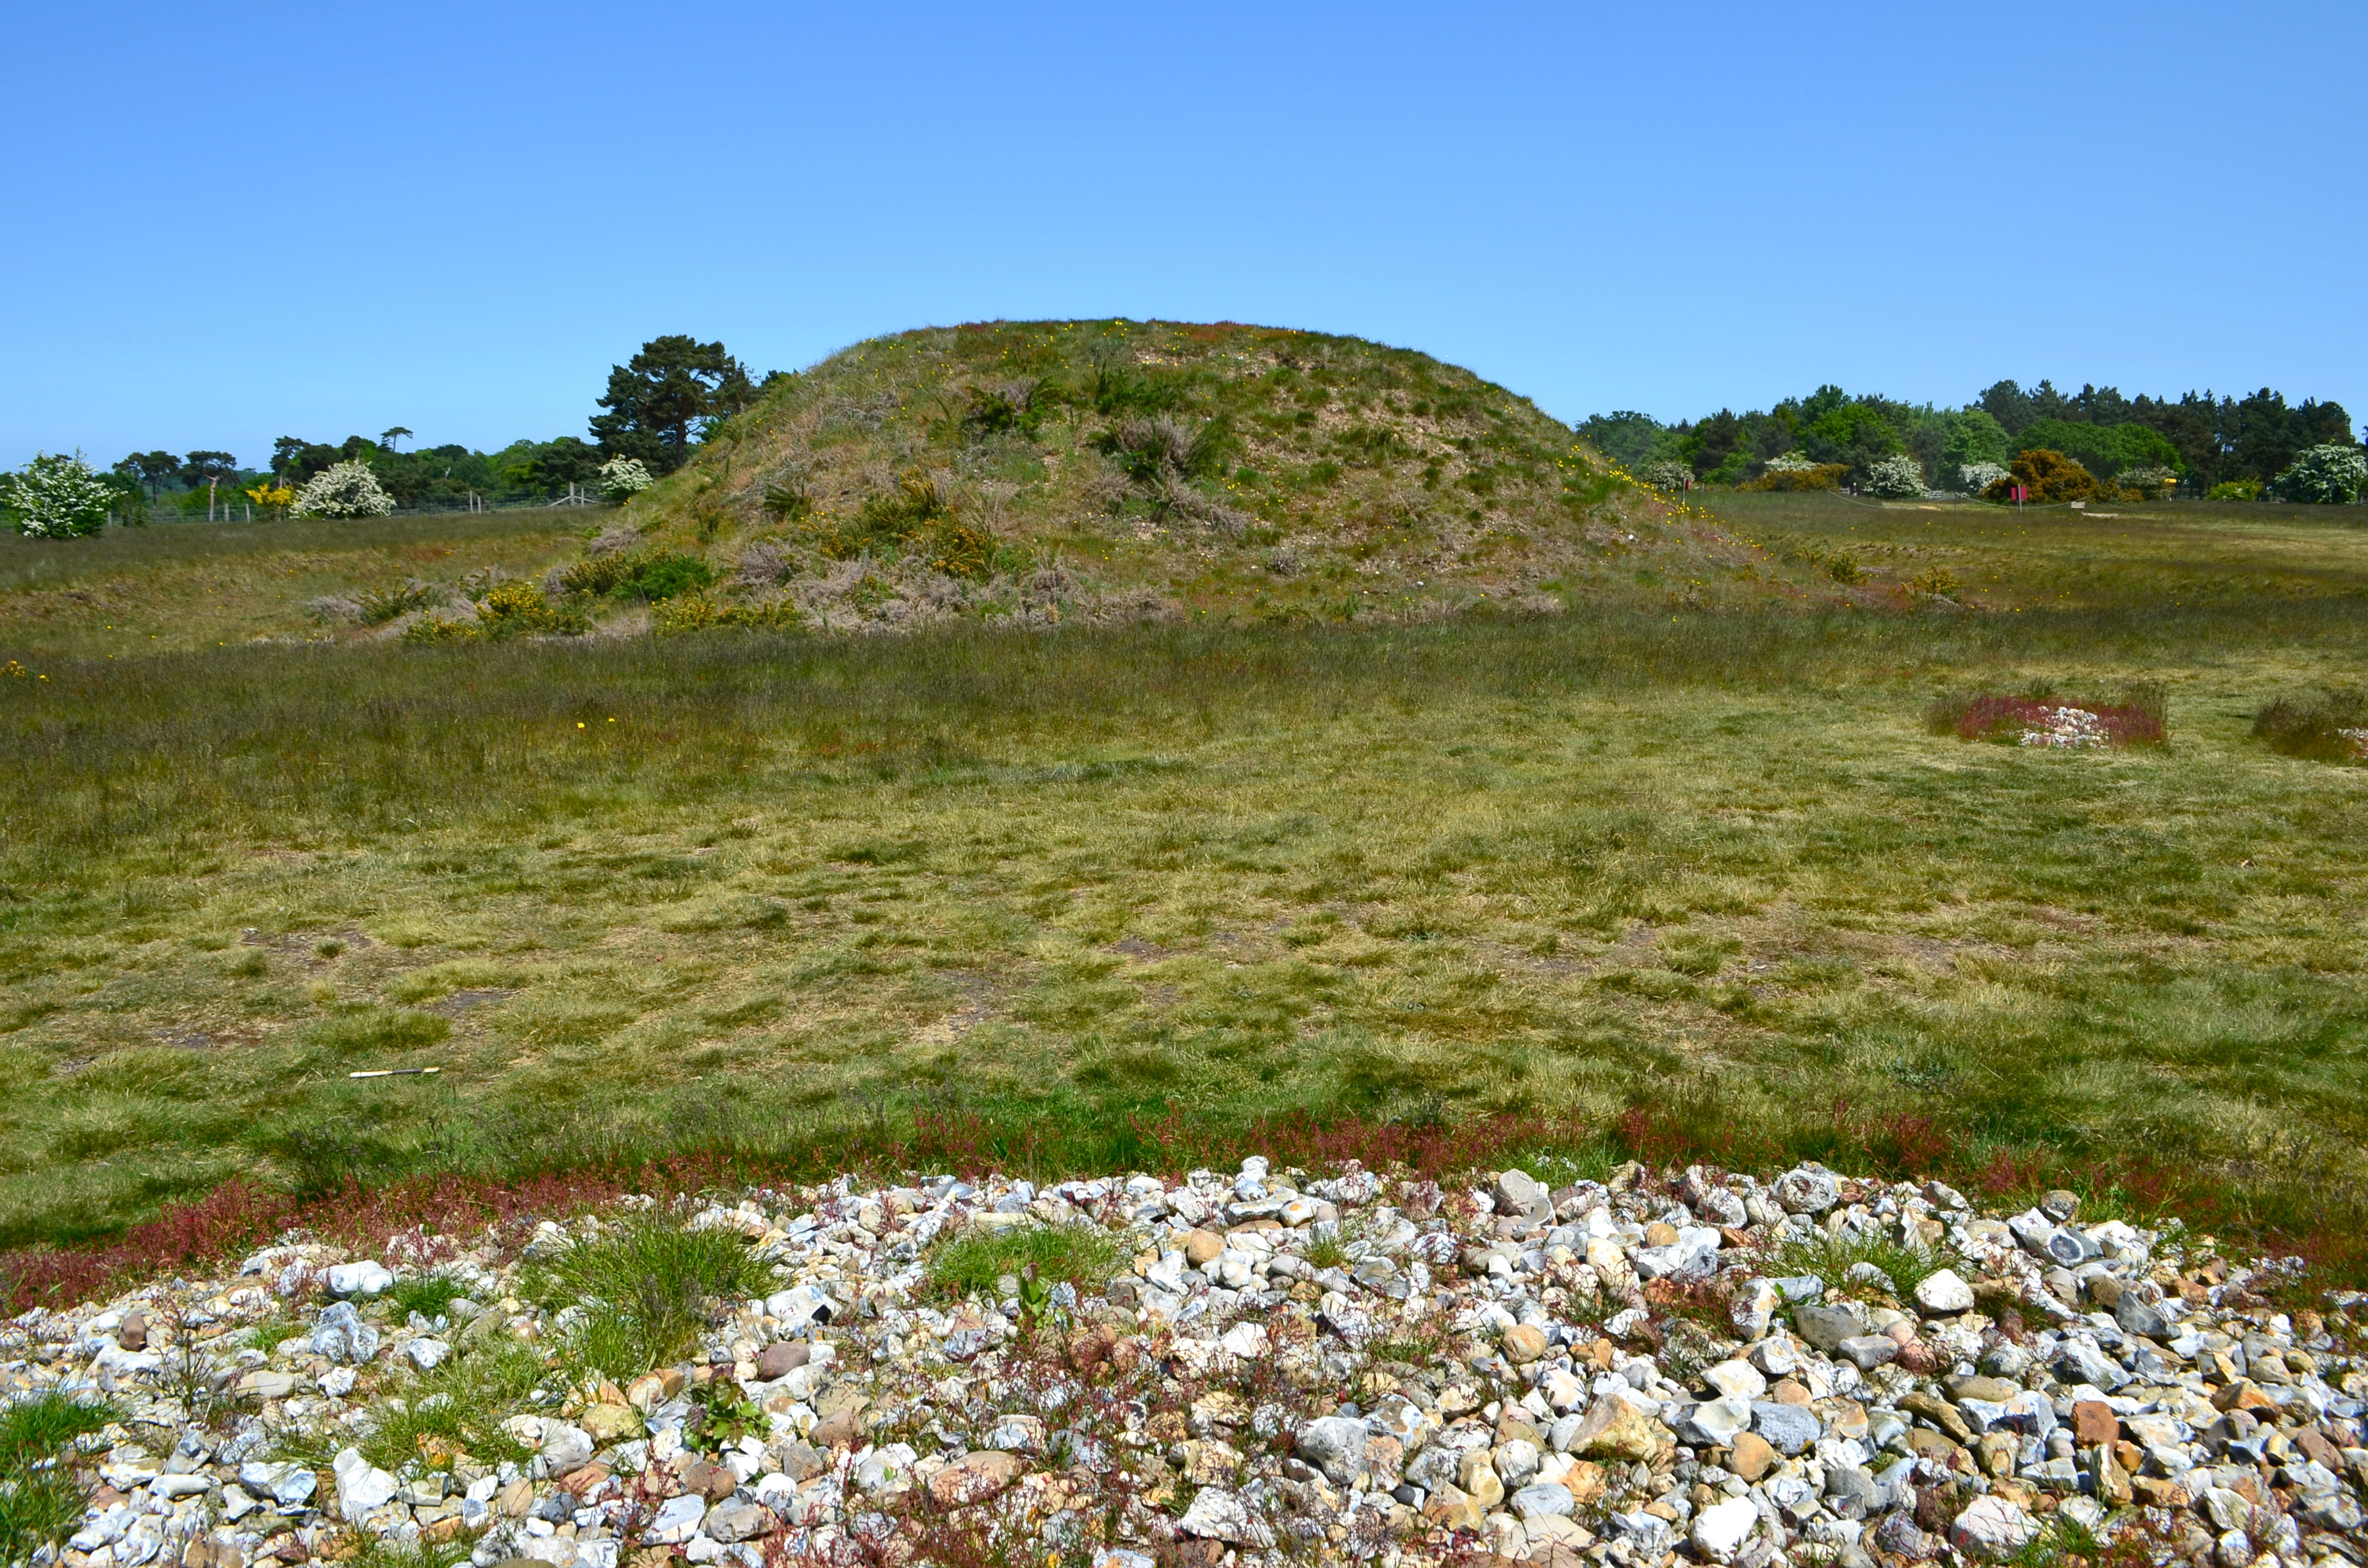 Mound two at Sutton Hoo